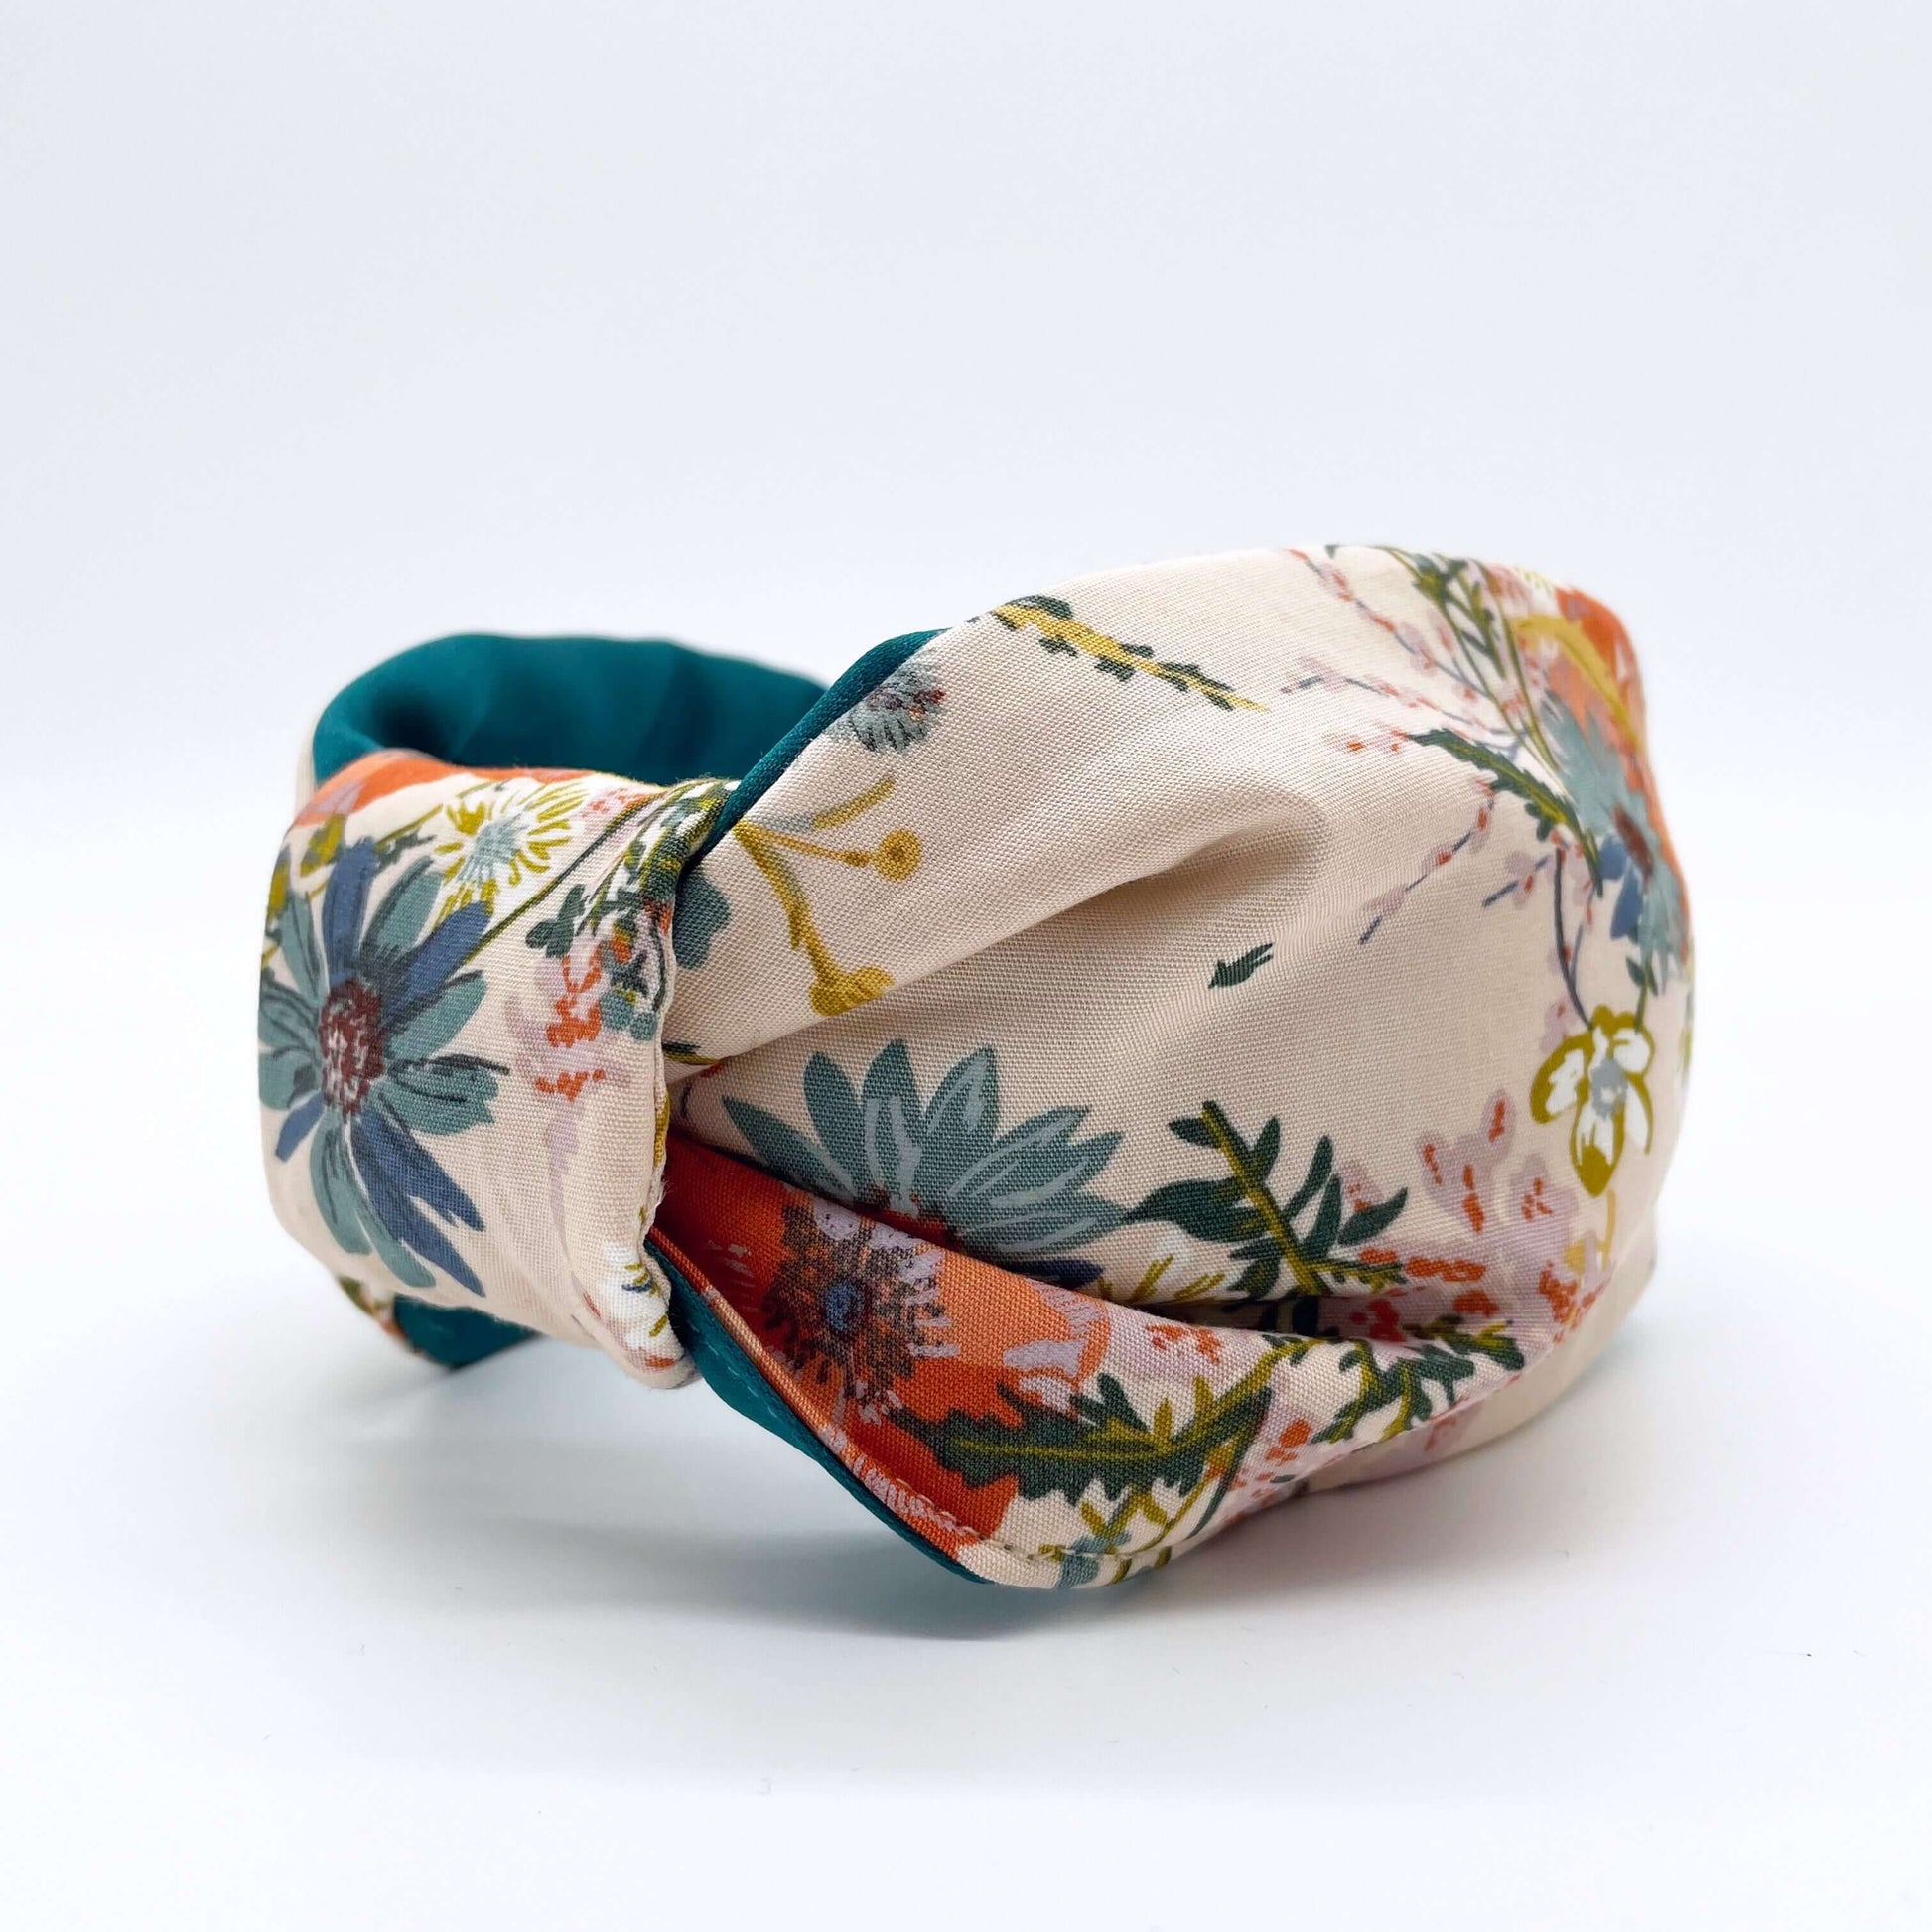 A cream floral knotted headband with a teal satin lining on a white background